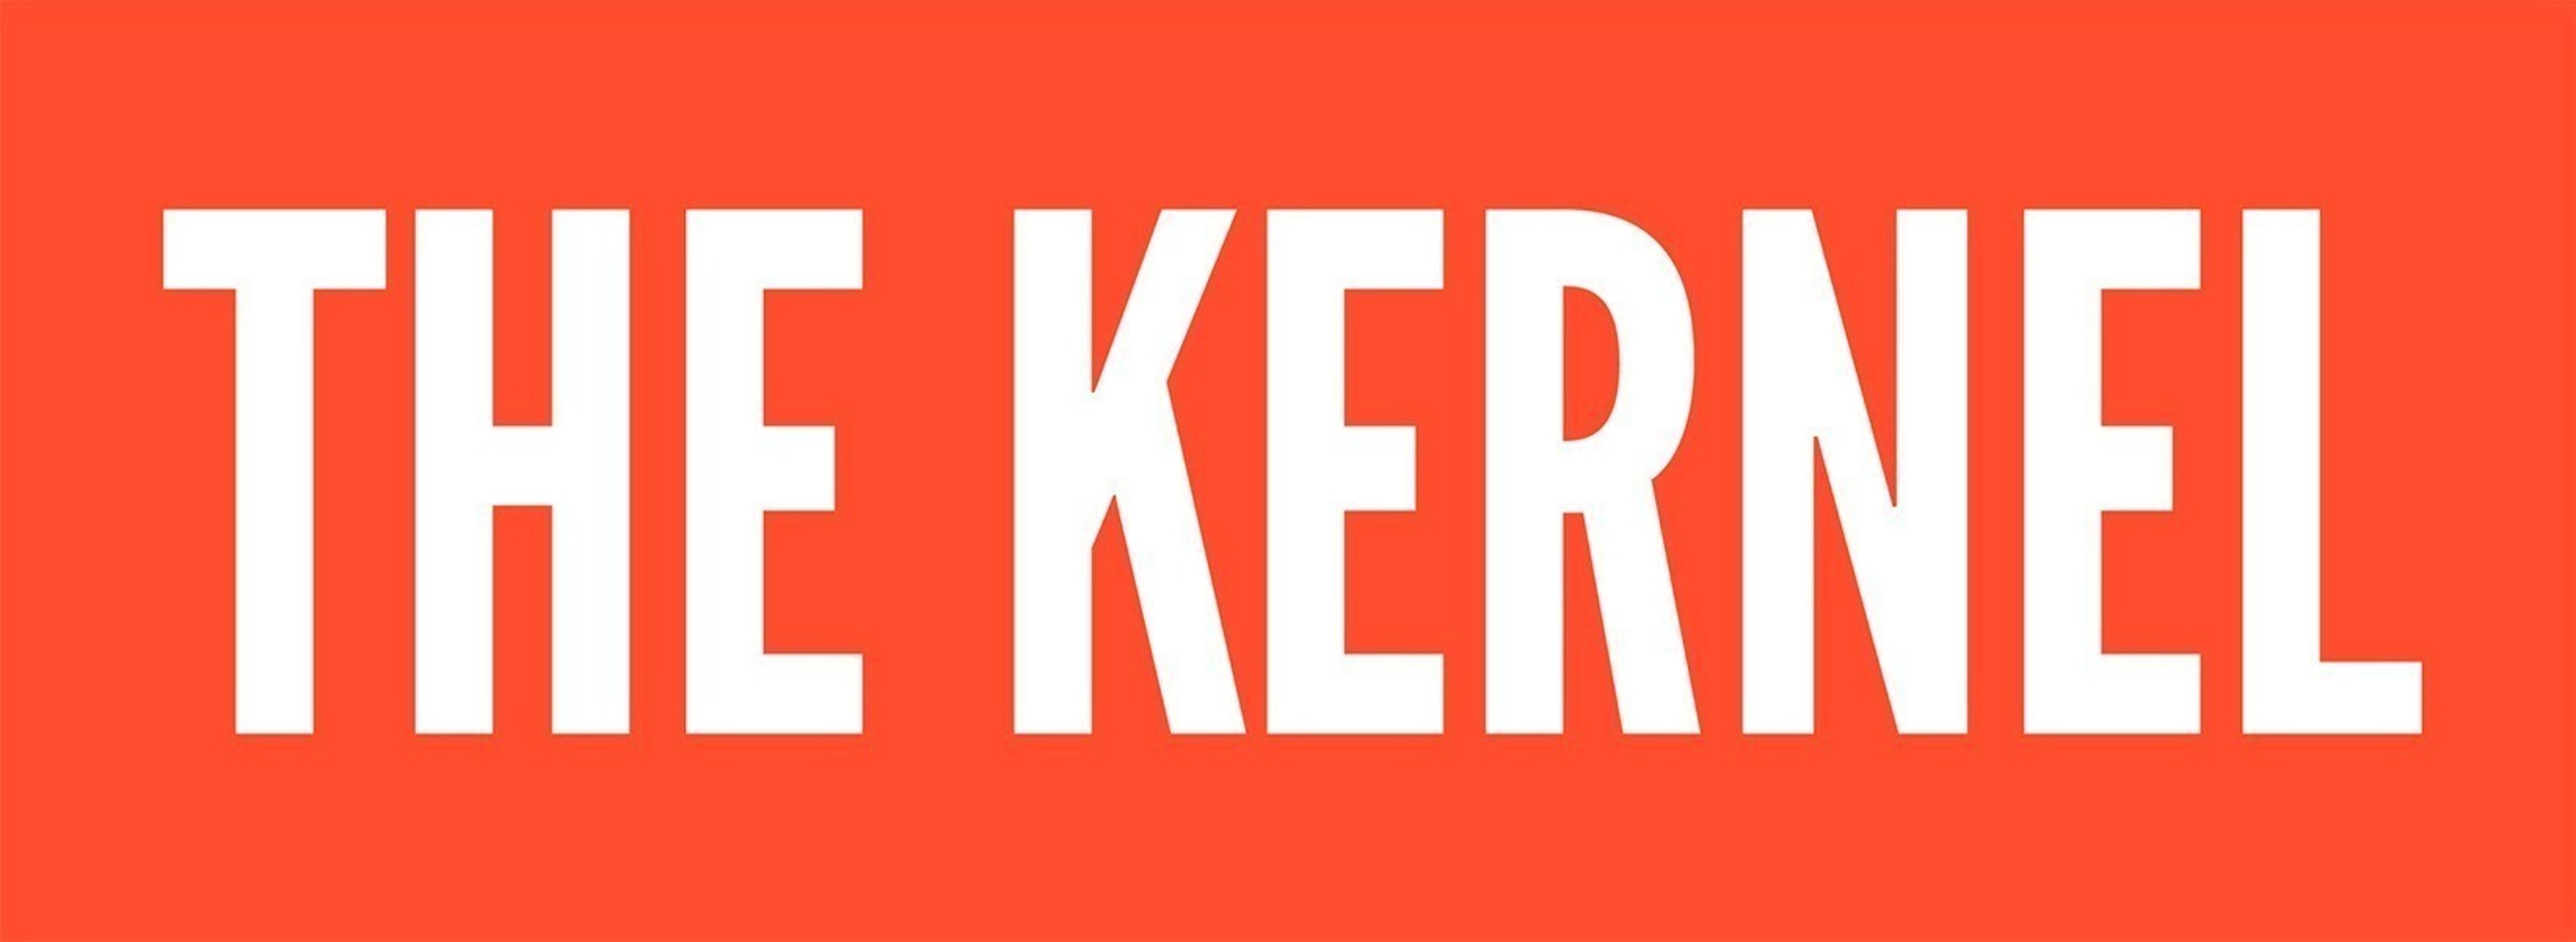 The Daily Dot launches The Kernel, an Internet-focused, digital Sunday magazine. (PRNewsFoto/The Daily Dot)